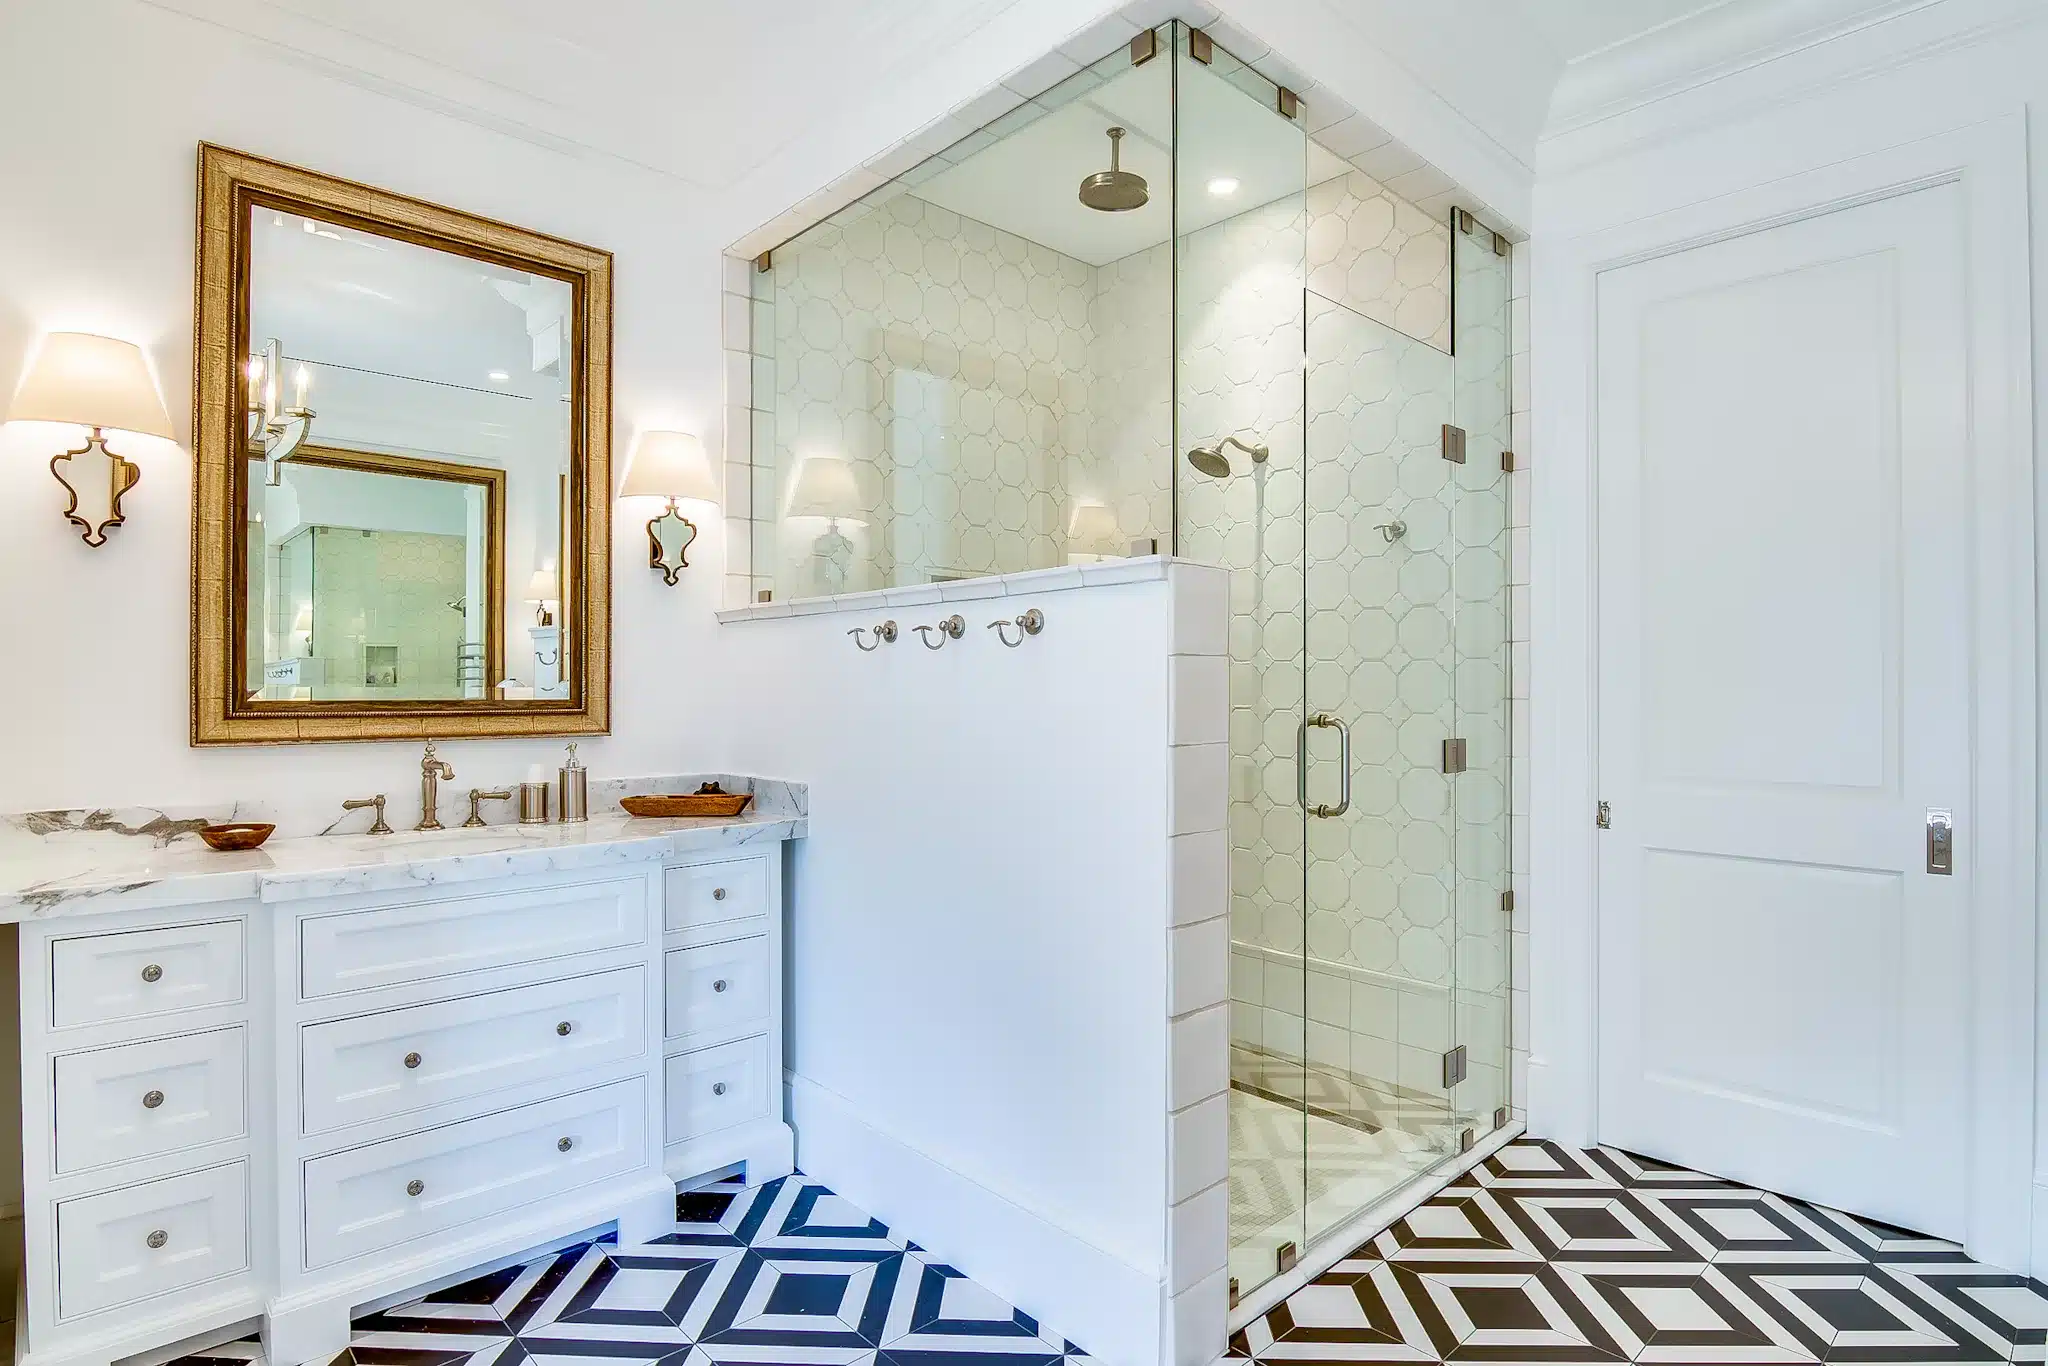 Bathroom glass type with mirror and white cabinets outside